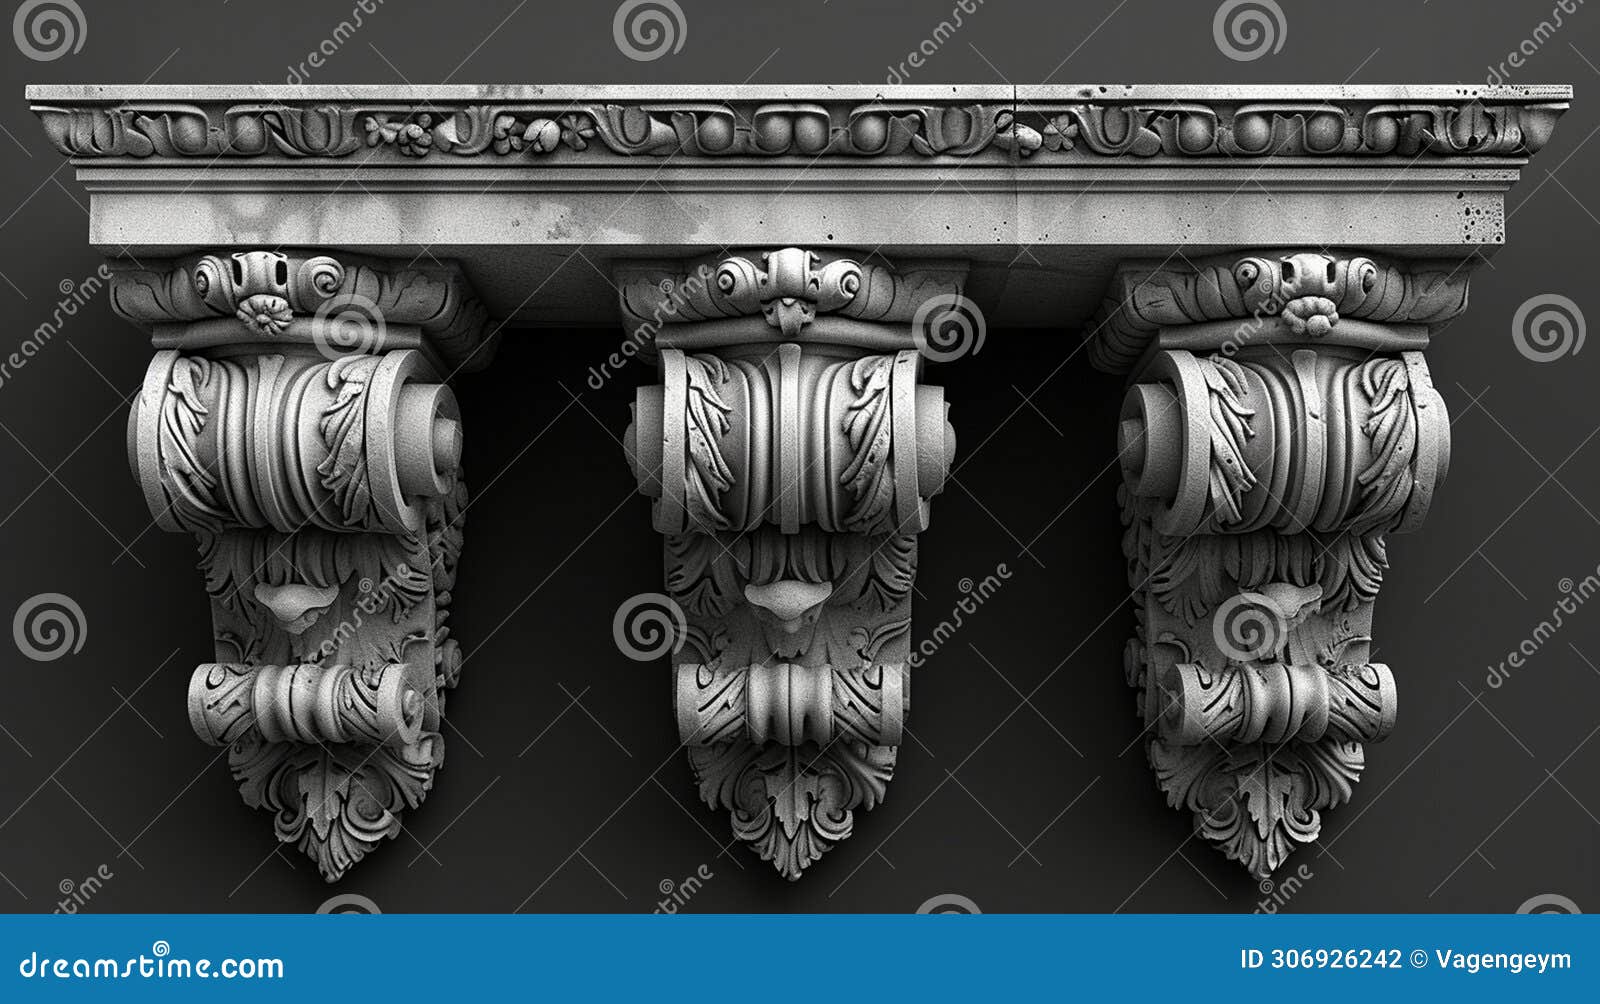 monochrome architectural stonework featuring ornate corinthian capitals and detailed friezes